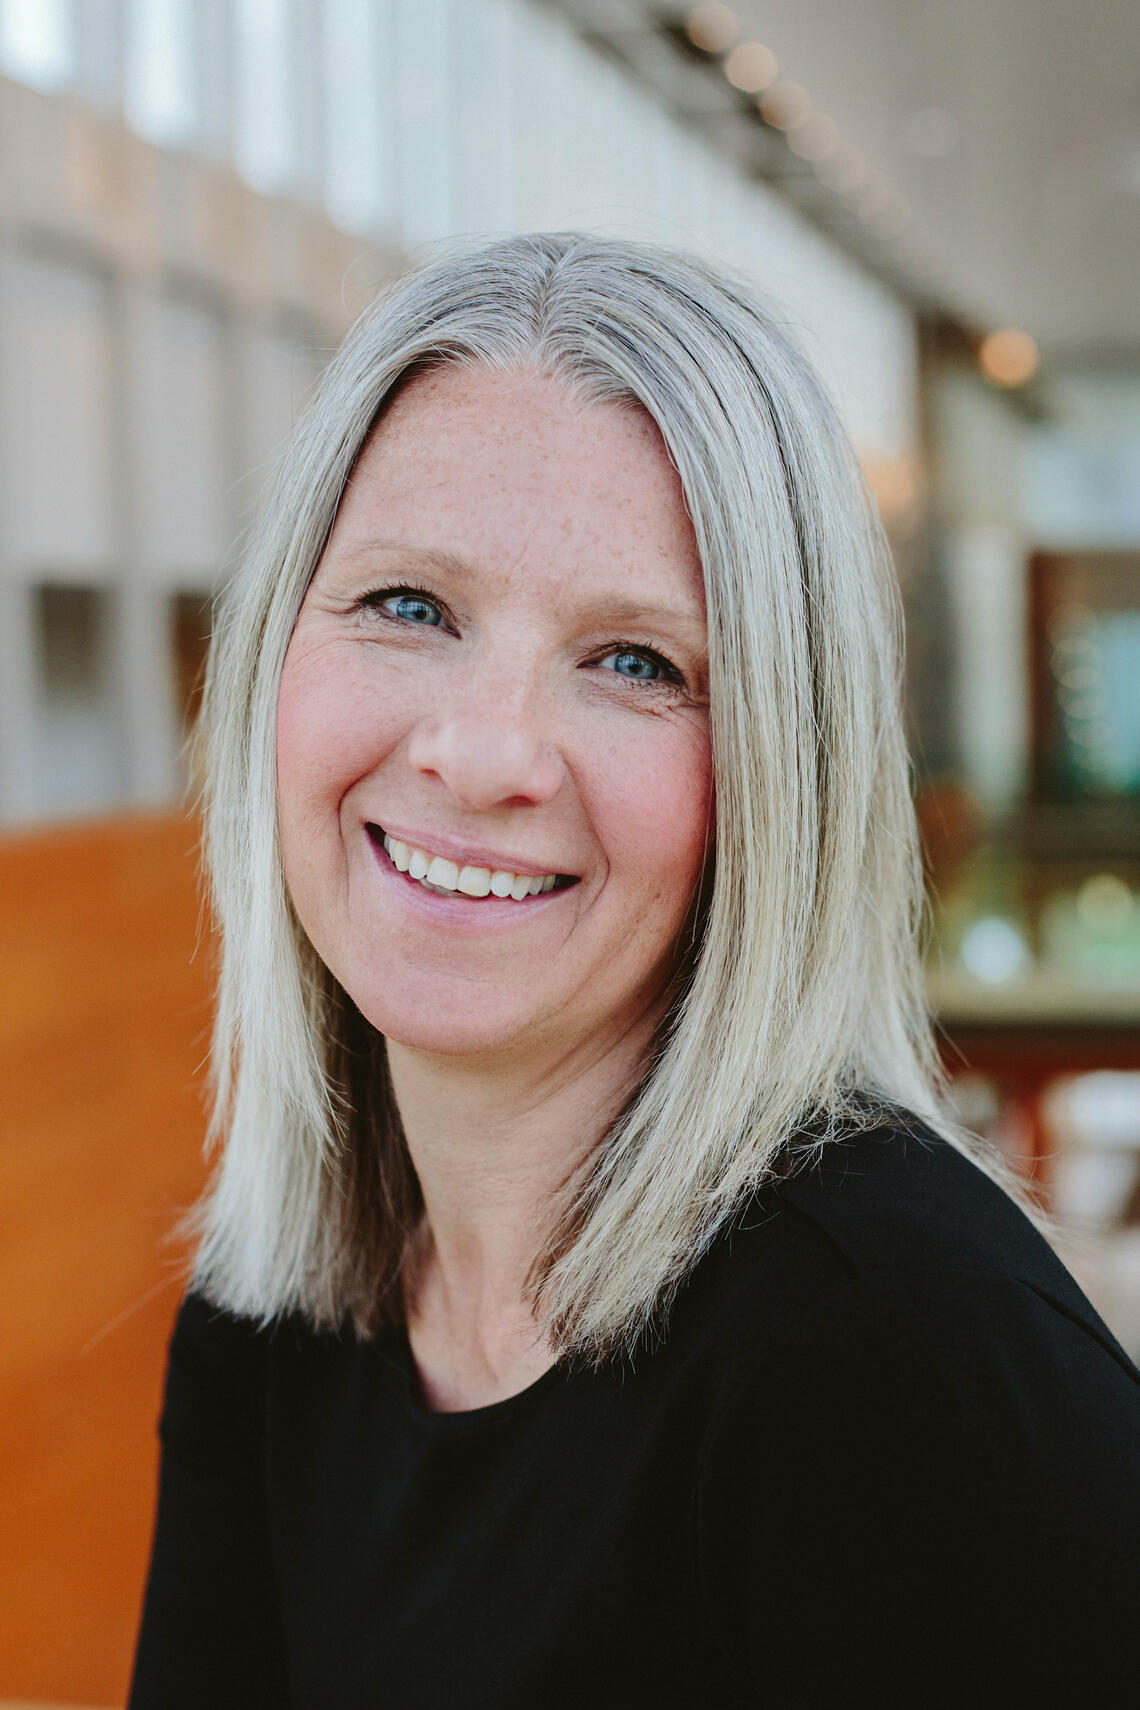 Natasha Kenny, a white woman with straight grey hair, wearing a black shirt and smiling inside the Taylor Institute for Teaching and Learning.